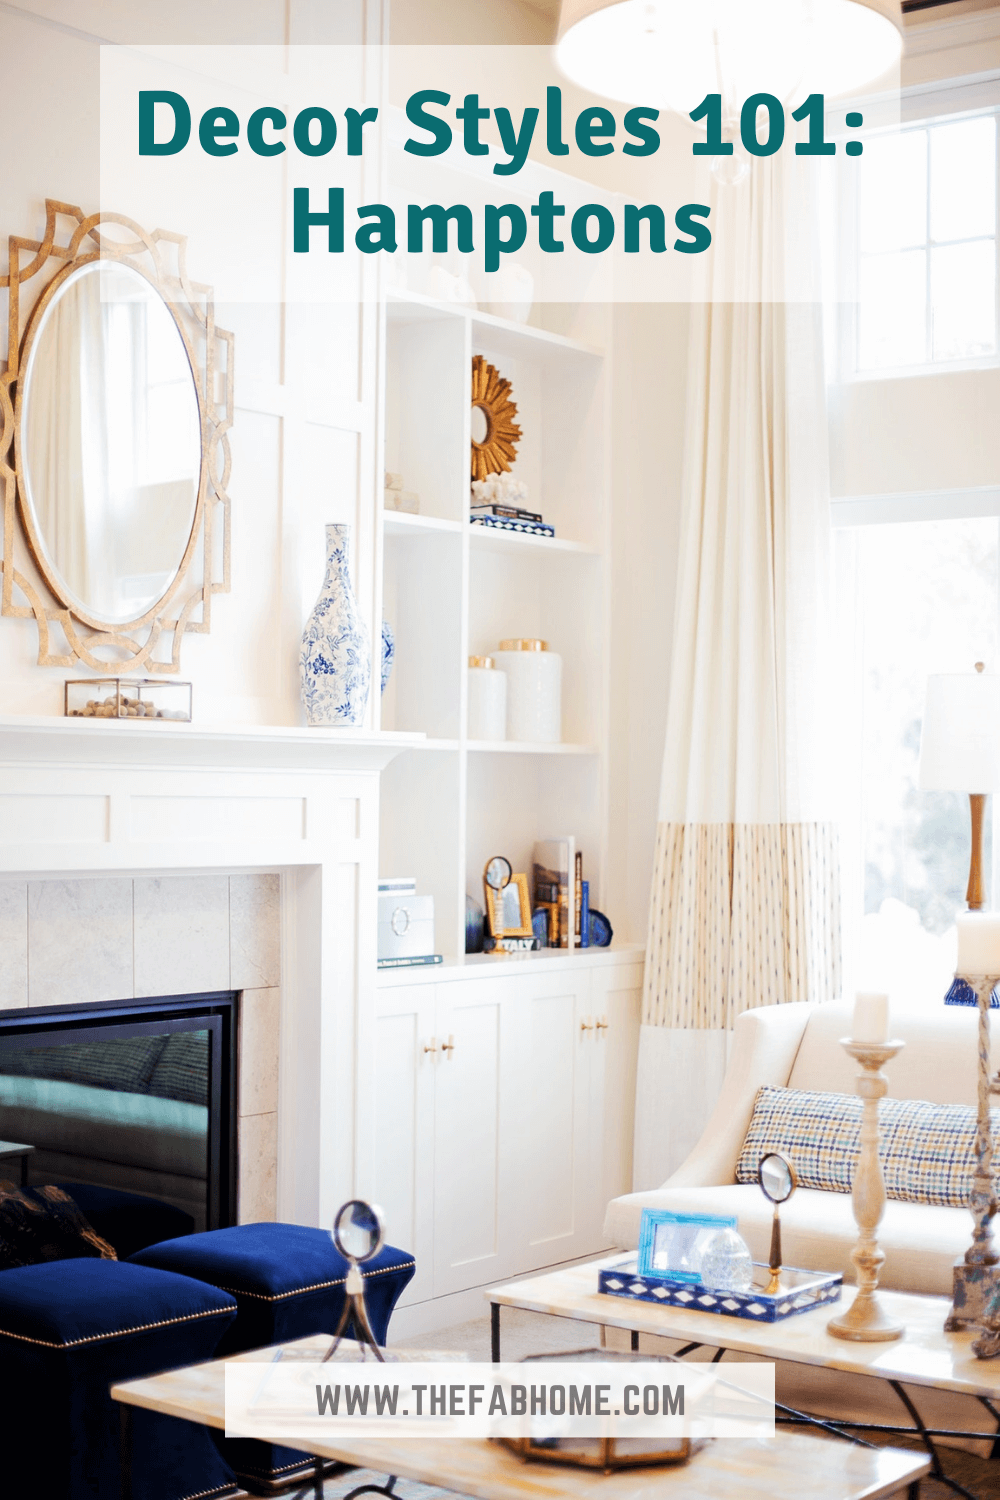 Live every day like a beach vacation, when you set up your space in the Hamptons decor style! Here are all the tips you need to bring home this style.